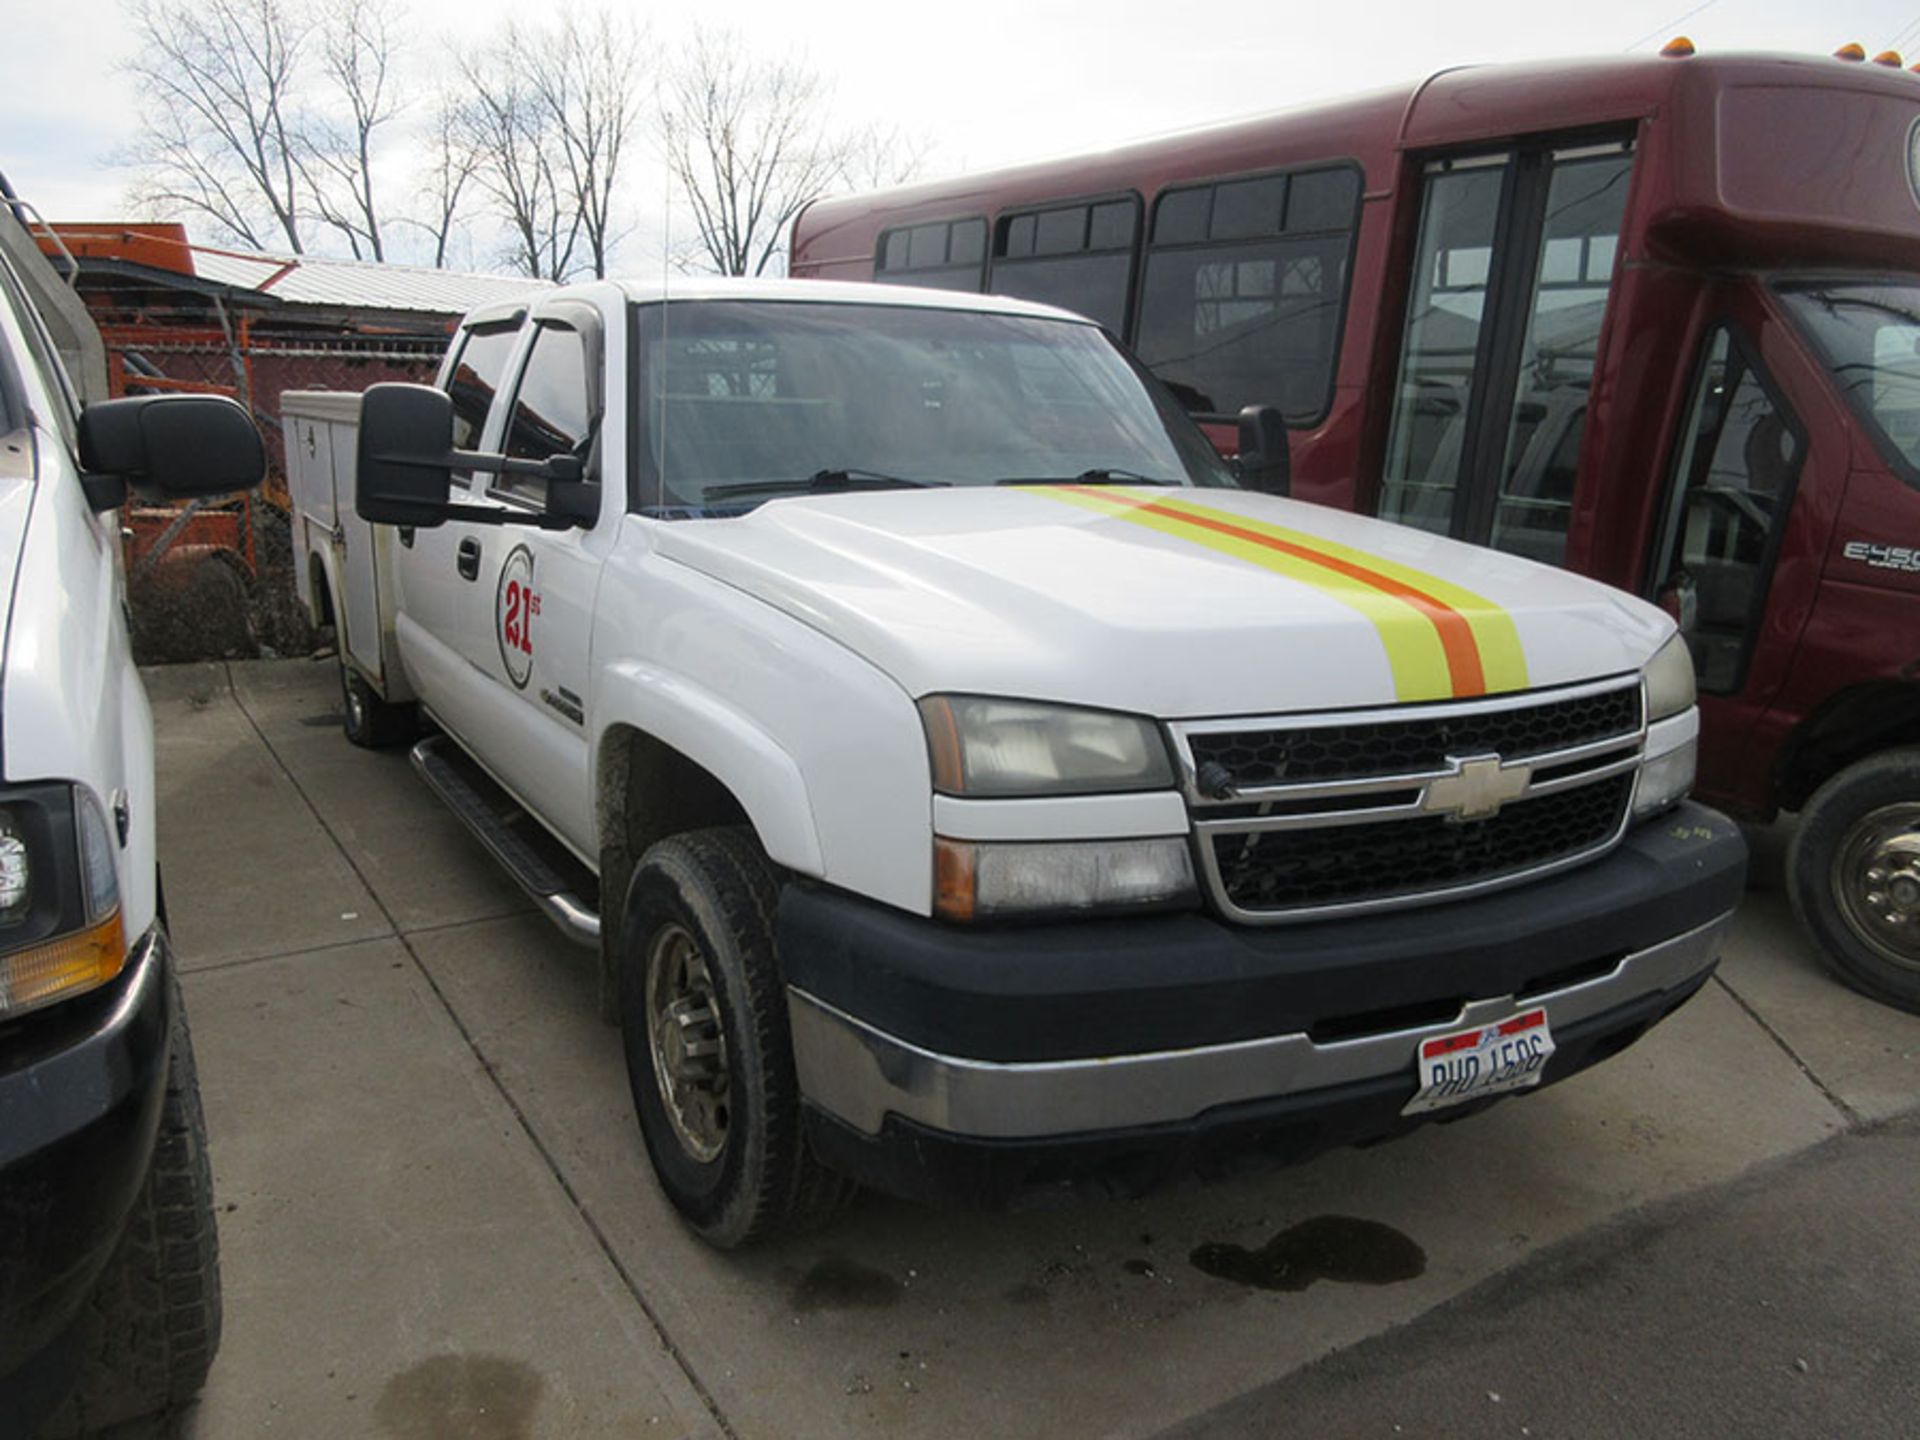 2006 CHEVROLET 2500 HD UTILITY TRUCK; CREW CAB, DIESEL, 191,663 MILES, VIN# 1GBHC23D06F187321 - Image 2 of 4